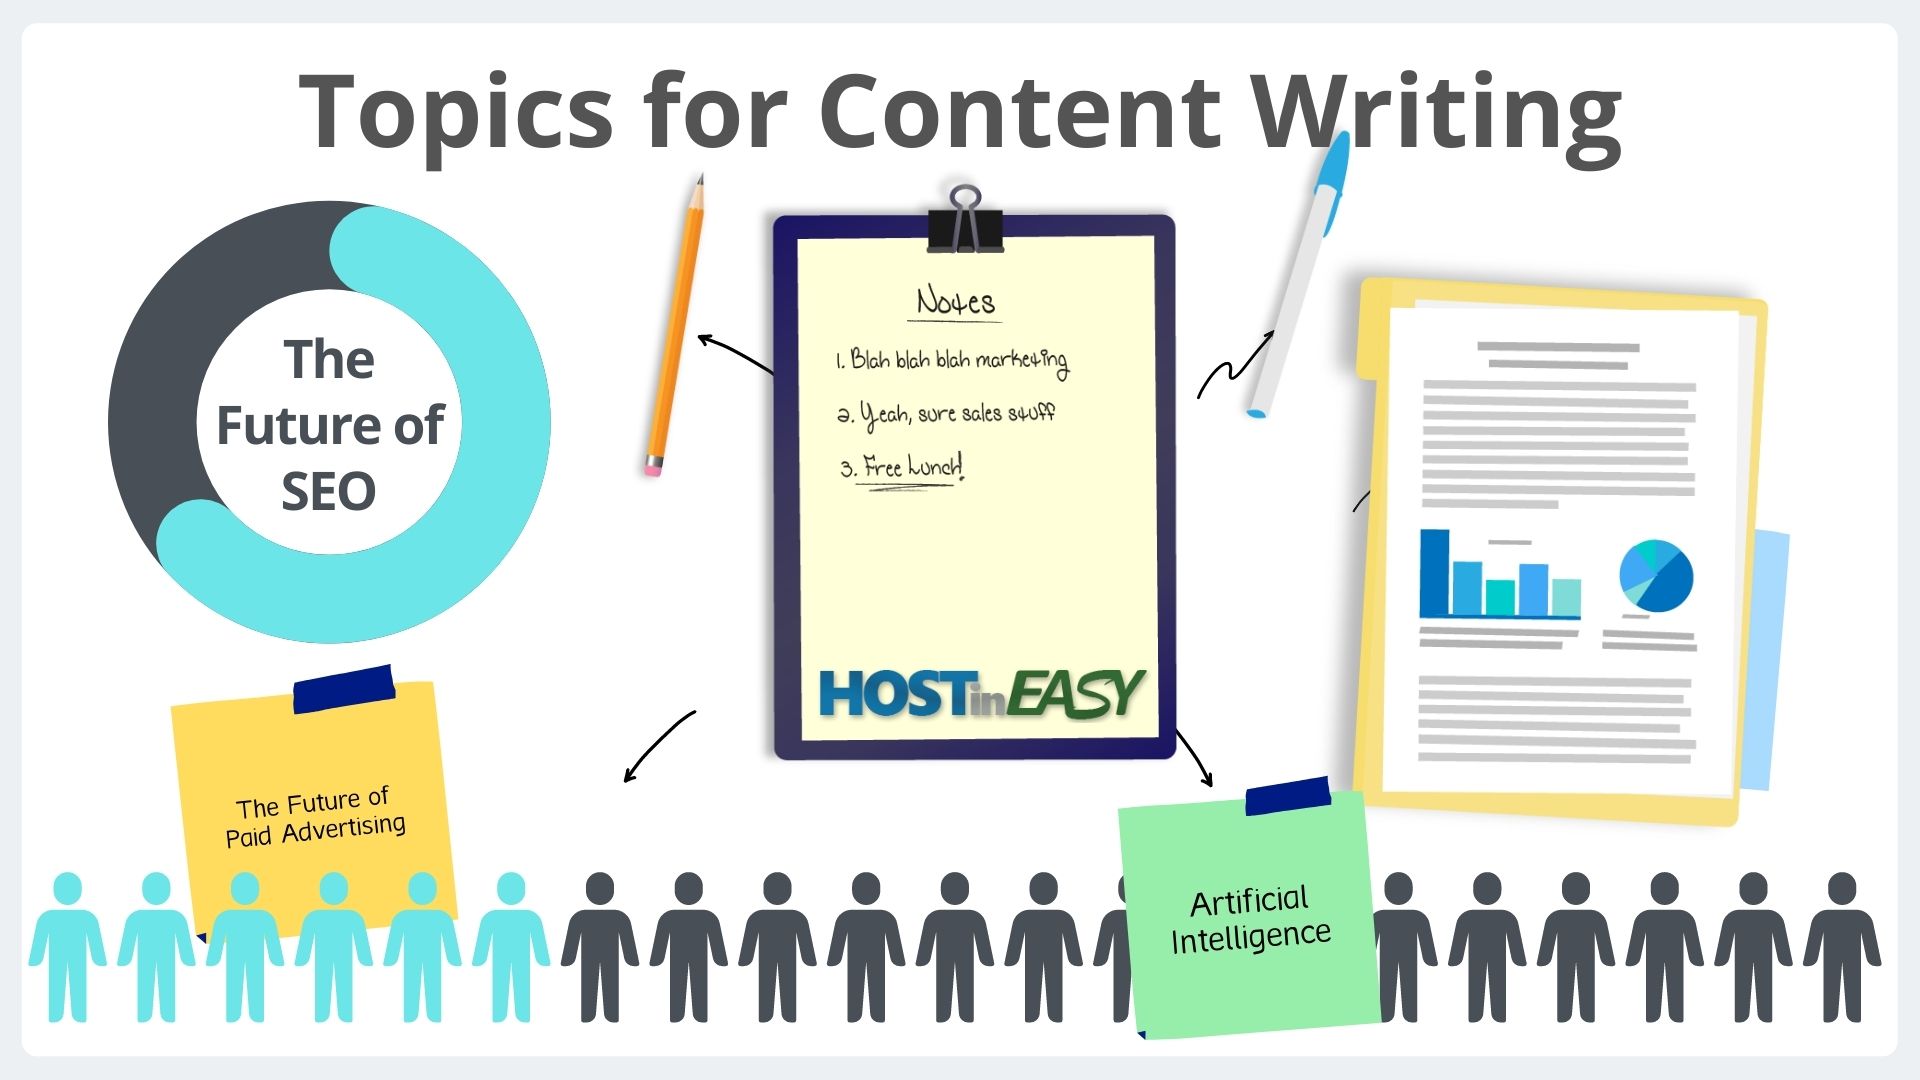 Topics for Content Writing